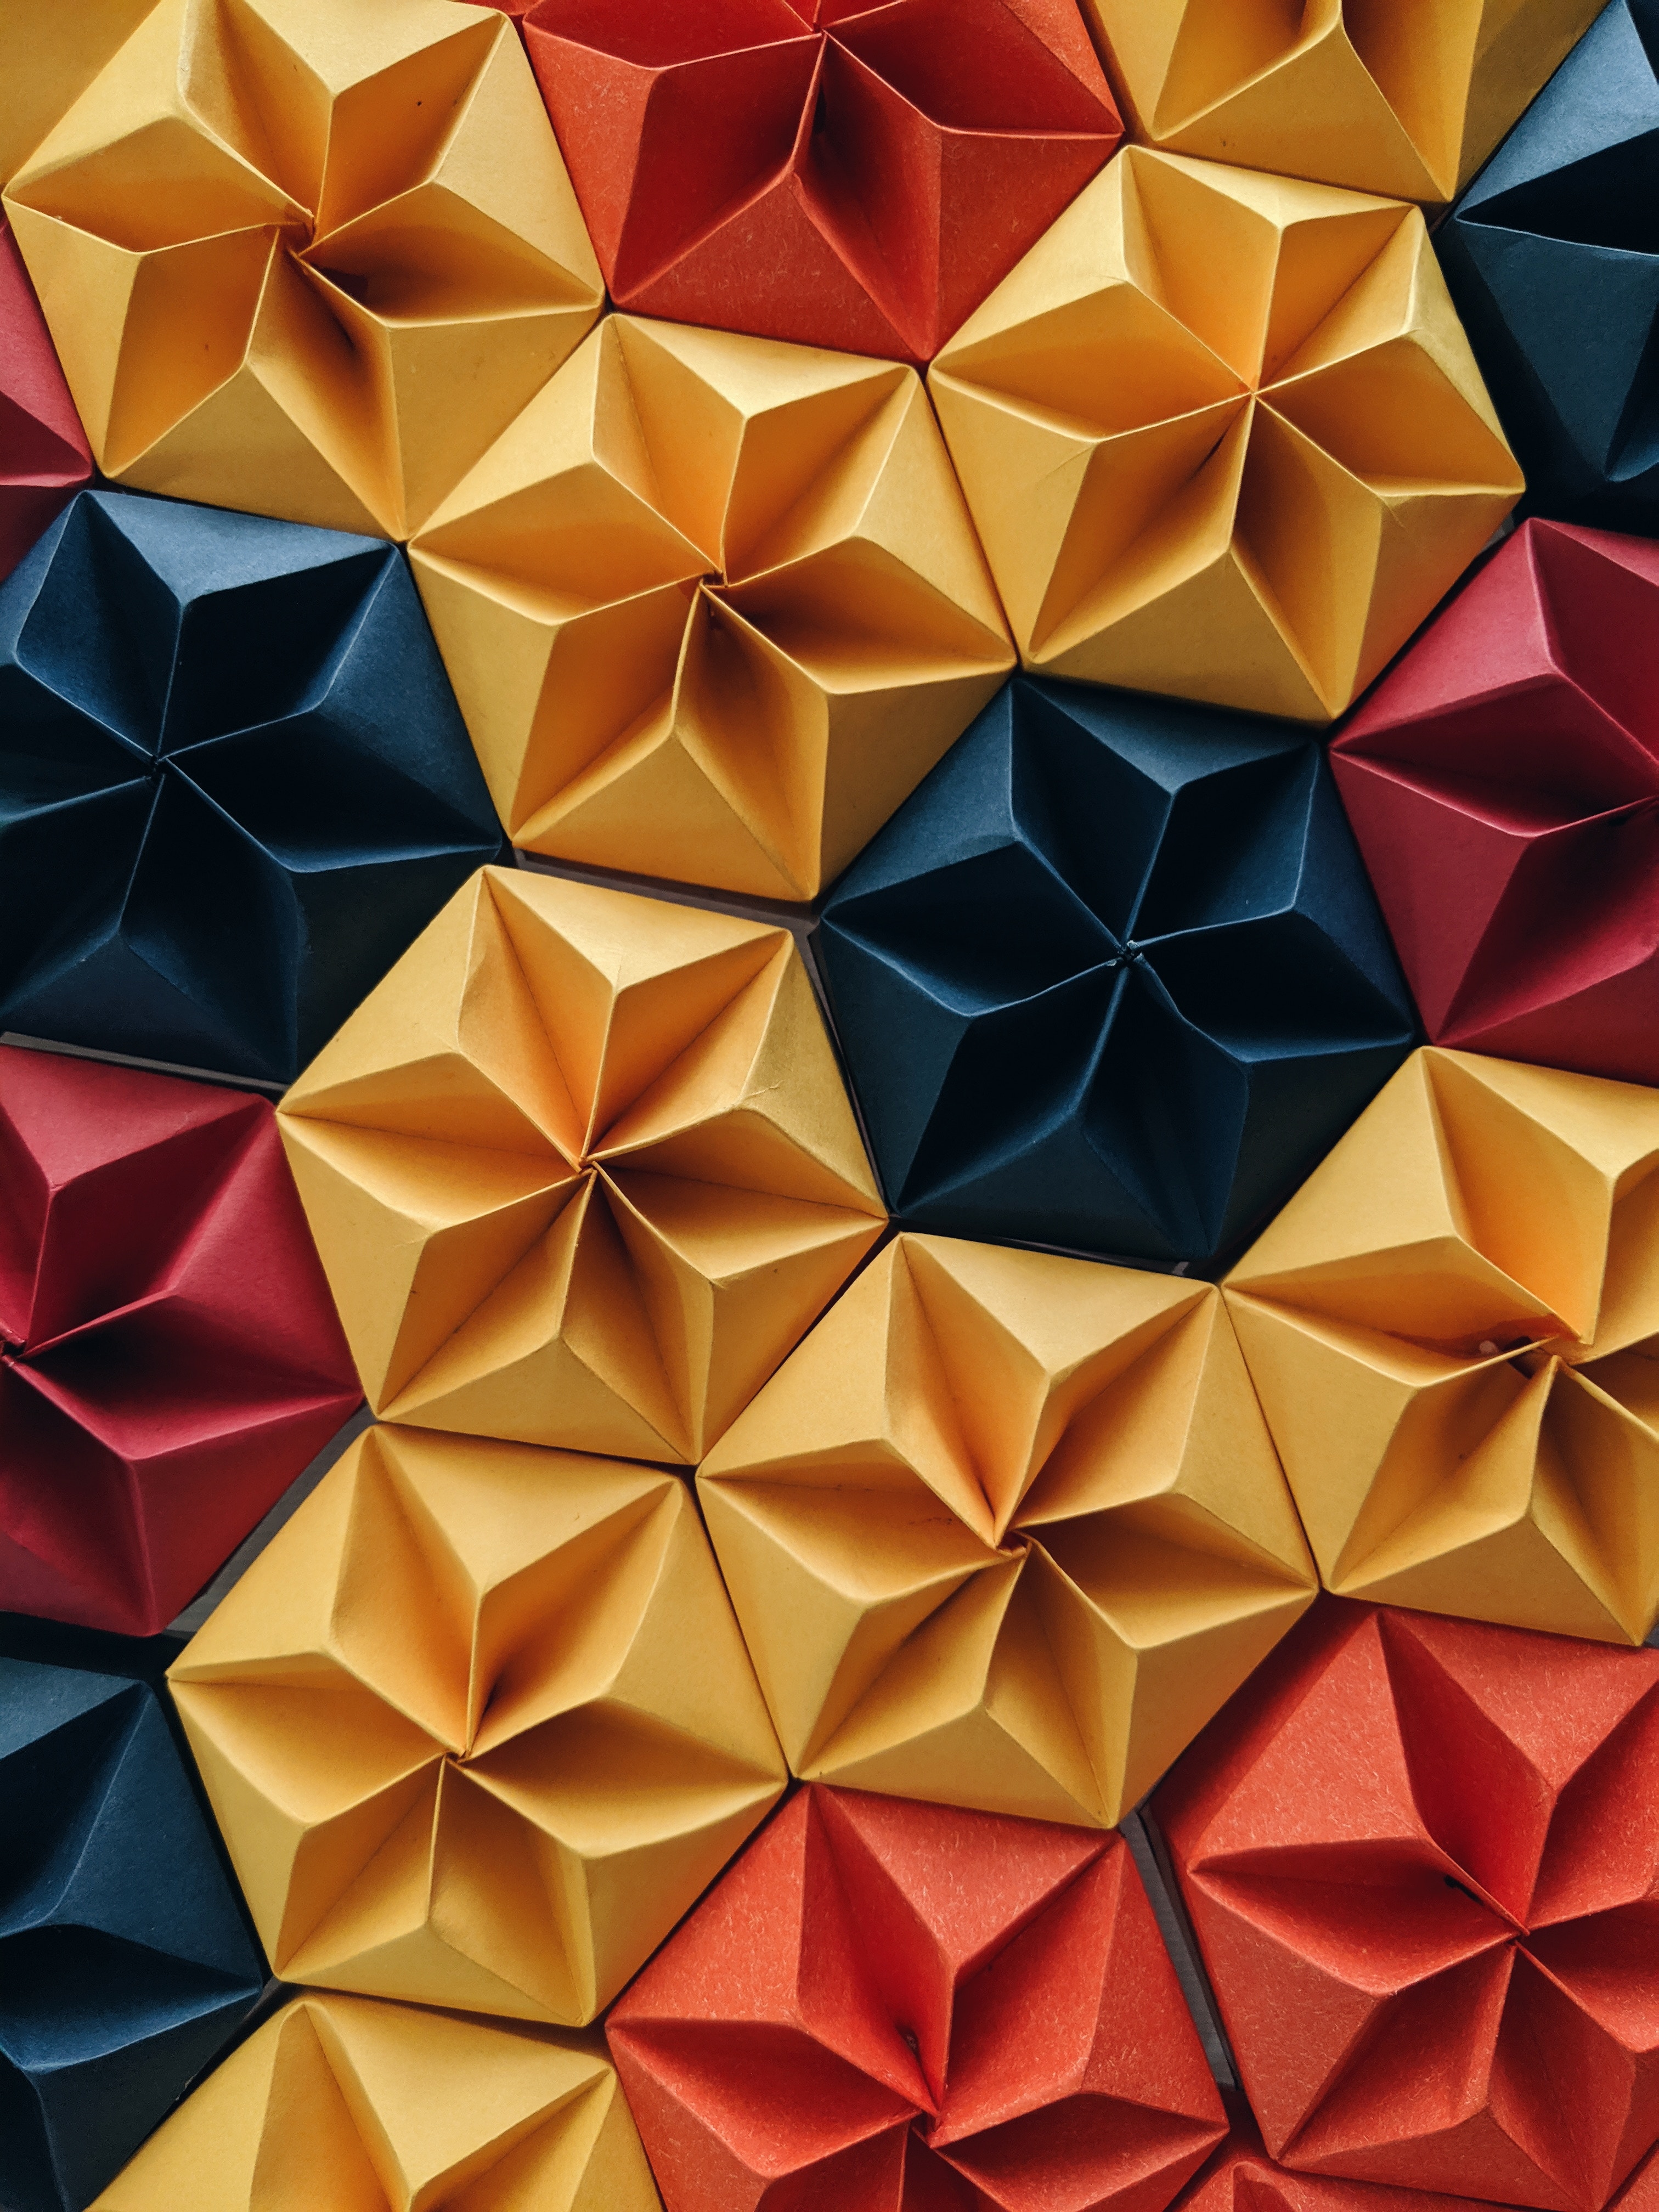 shape, multicolored, motley, texture, textures, shapes, paper, origami